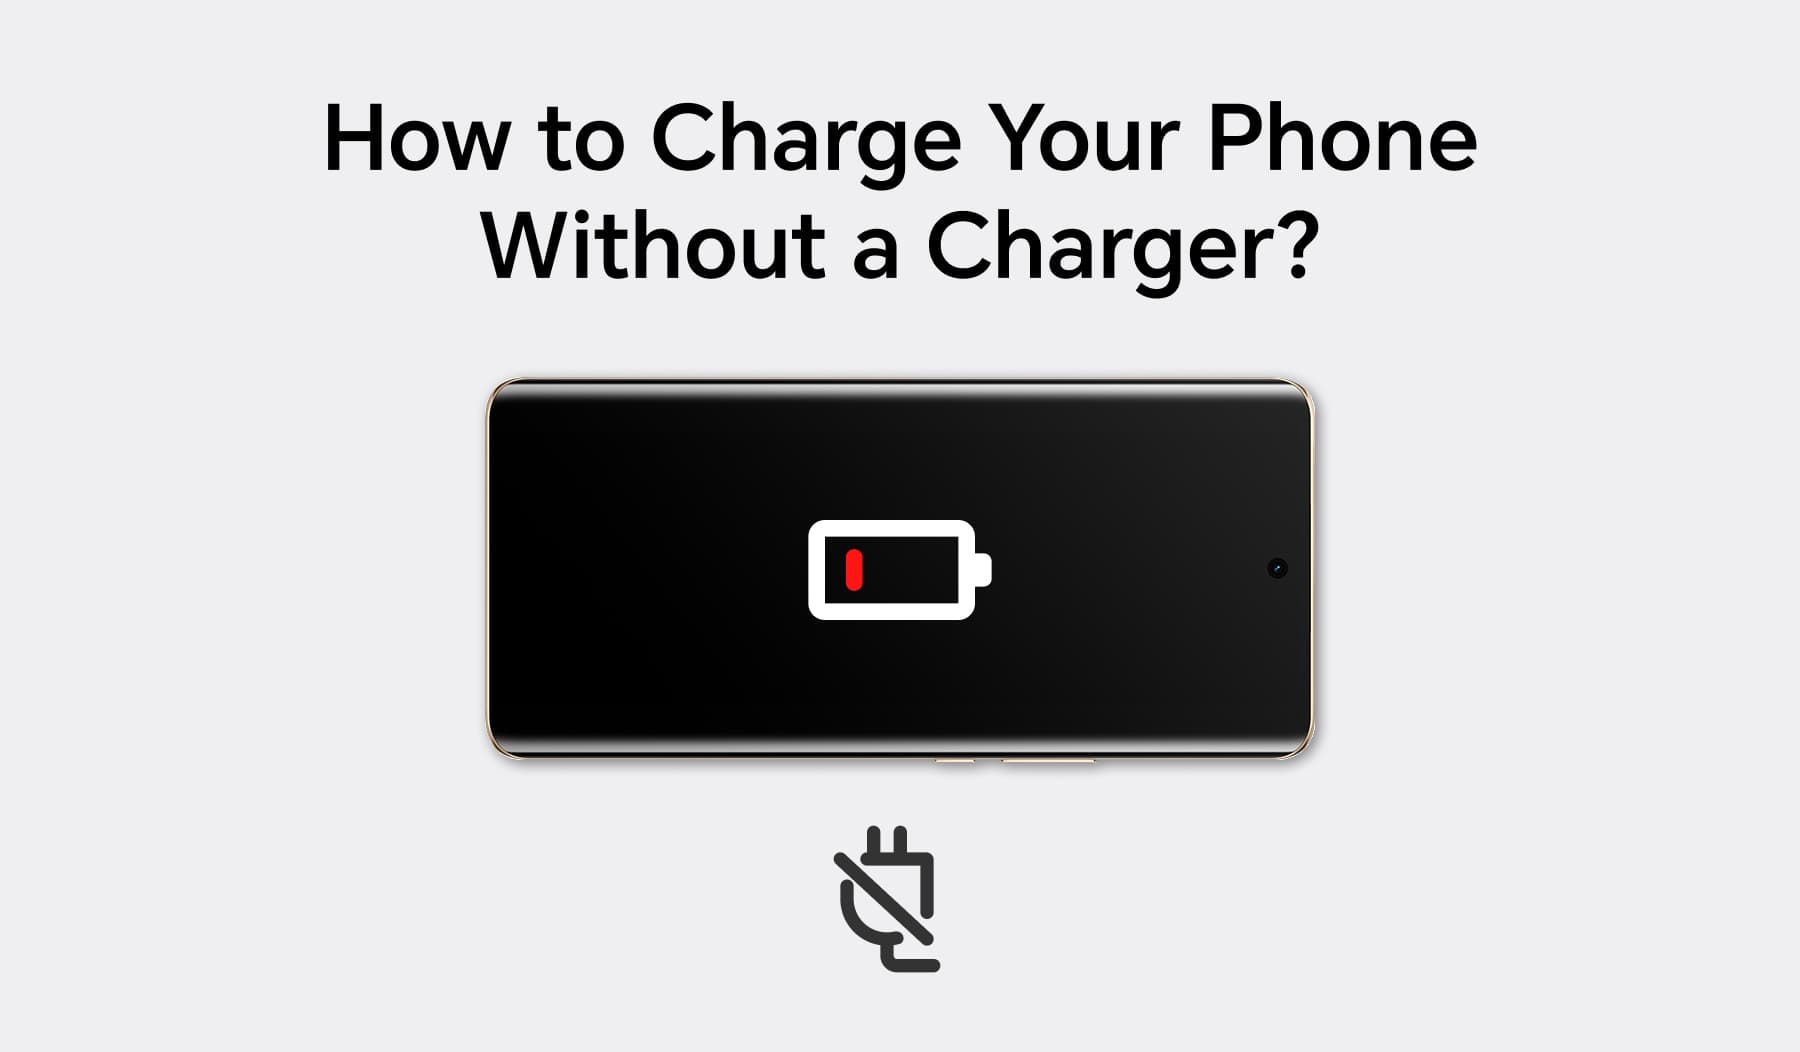 How to Charge Your Phone Without a Charger?